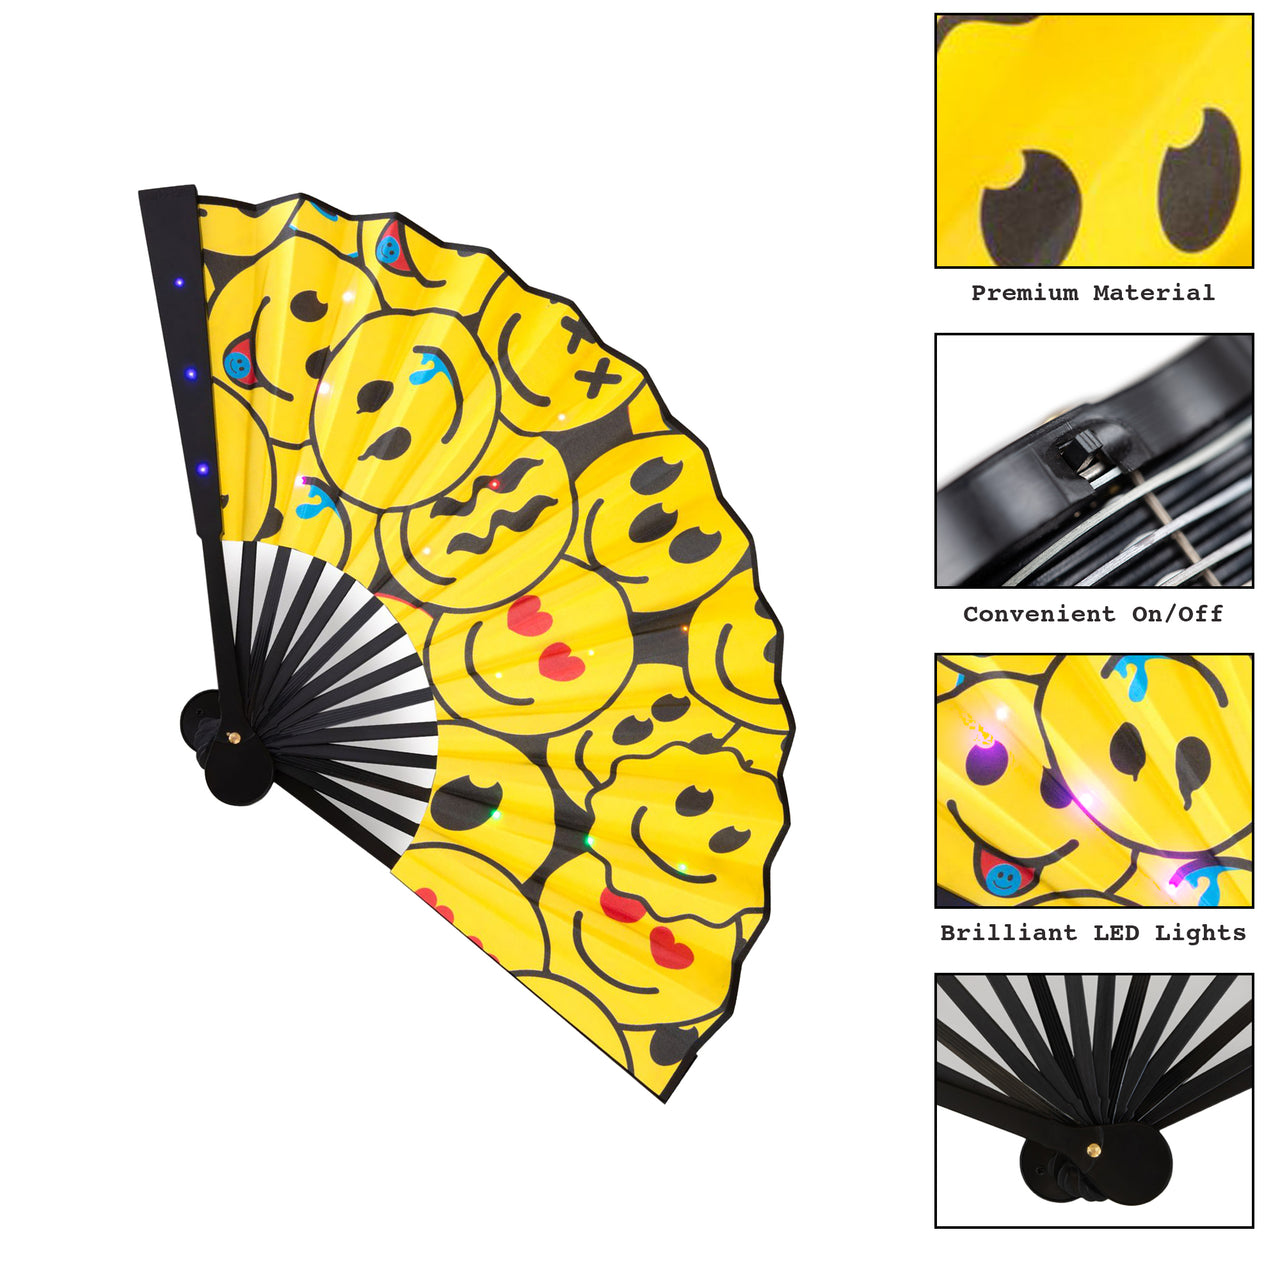 LED Hand Fan - "Be Happy" -  Don't Worry, Be Happy... With Our Smiley Emoji LED Hand Fan - Foldable for Easy Portability